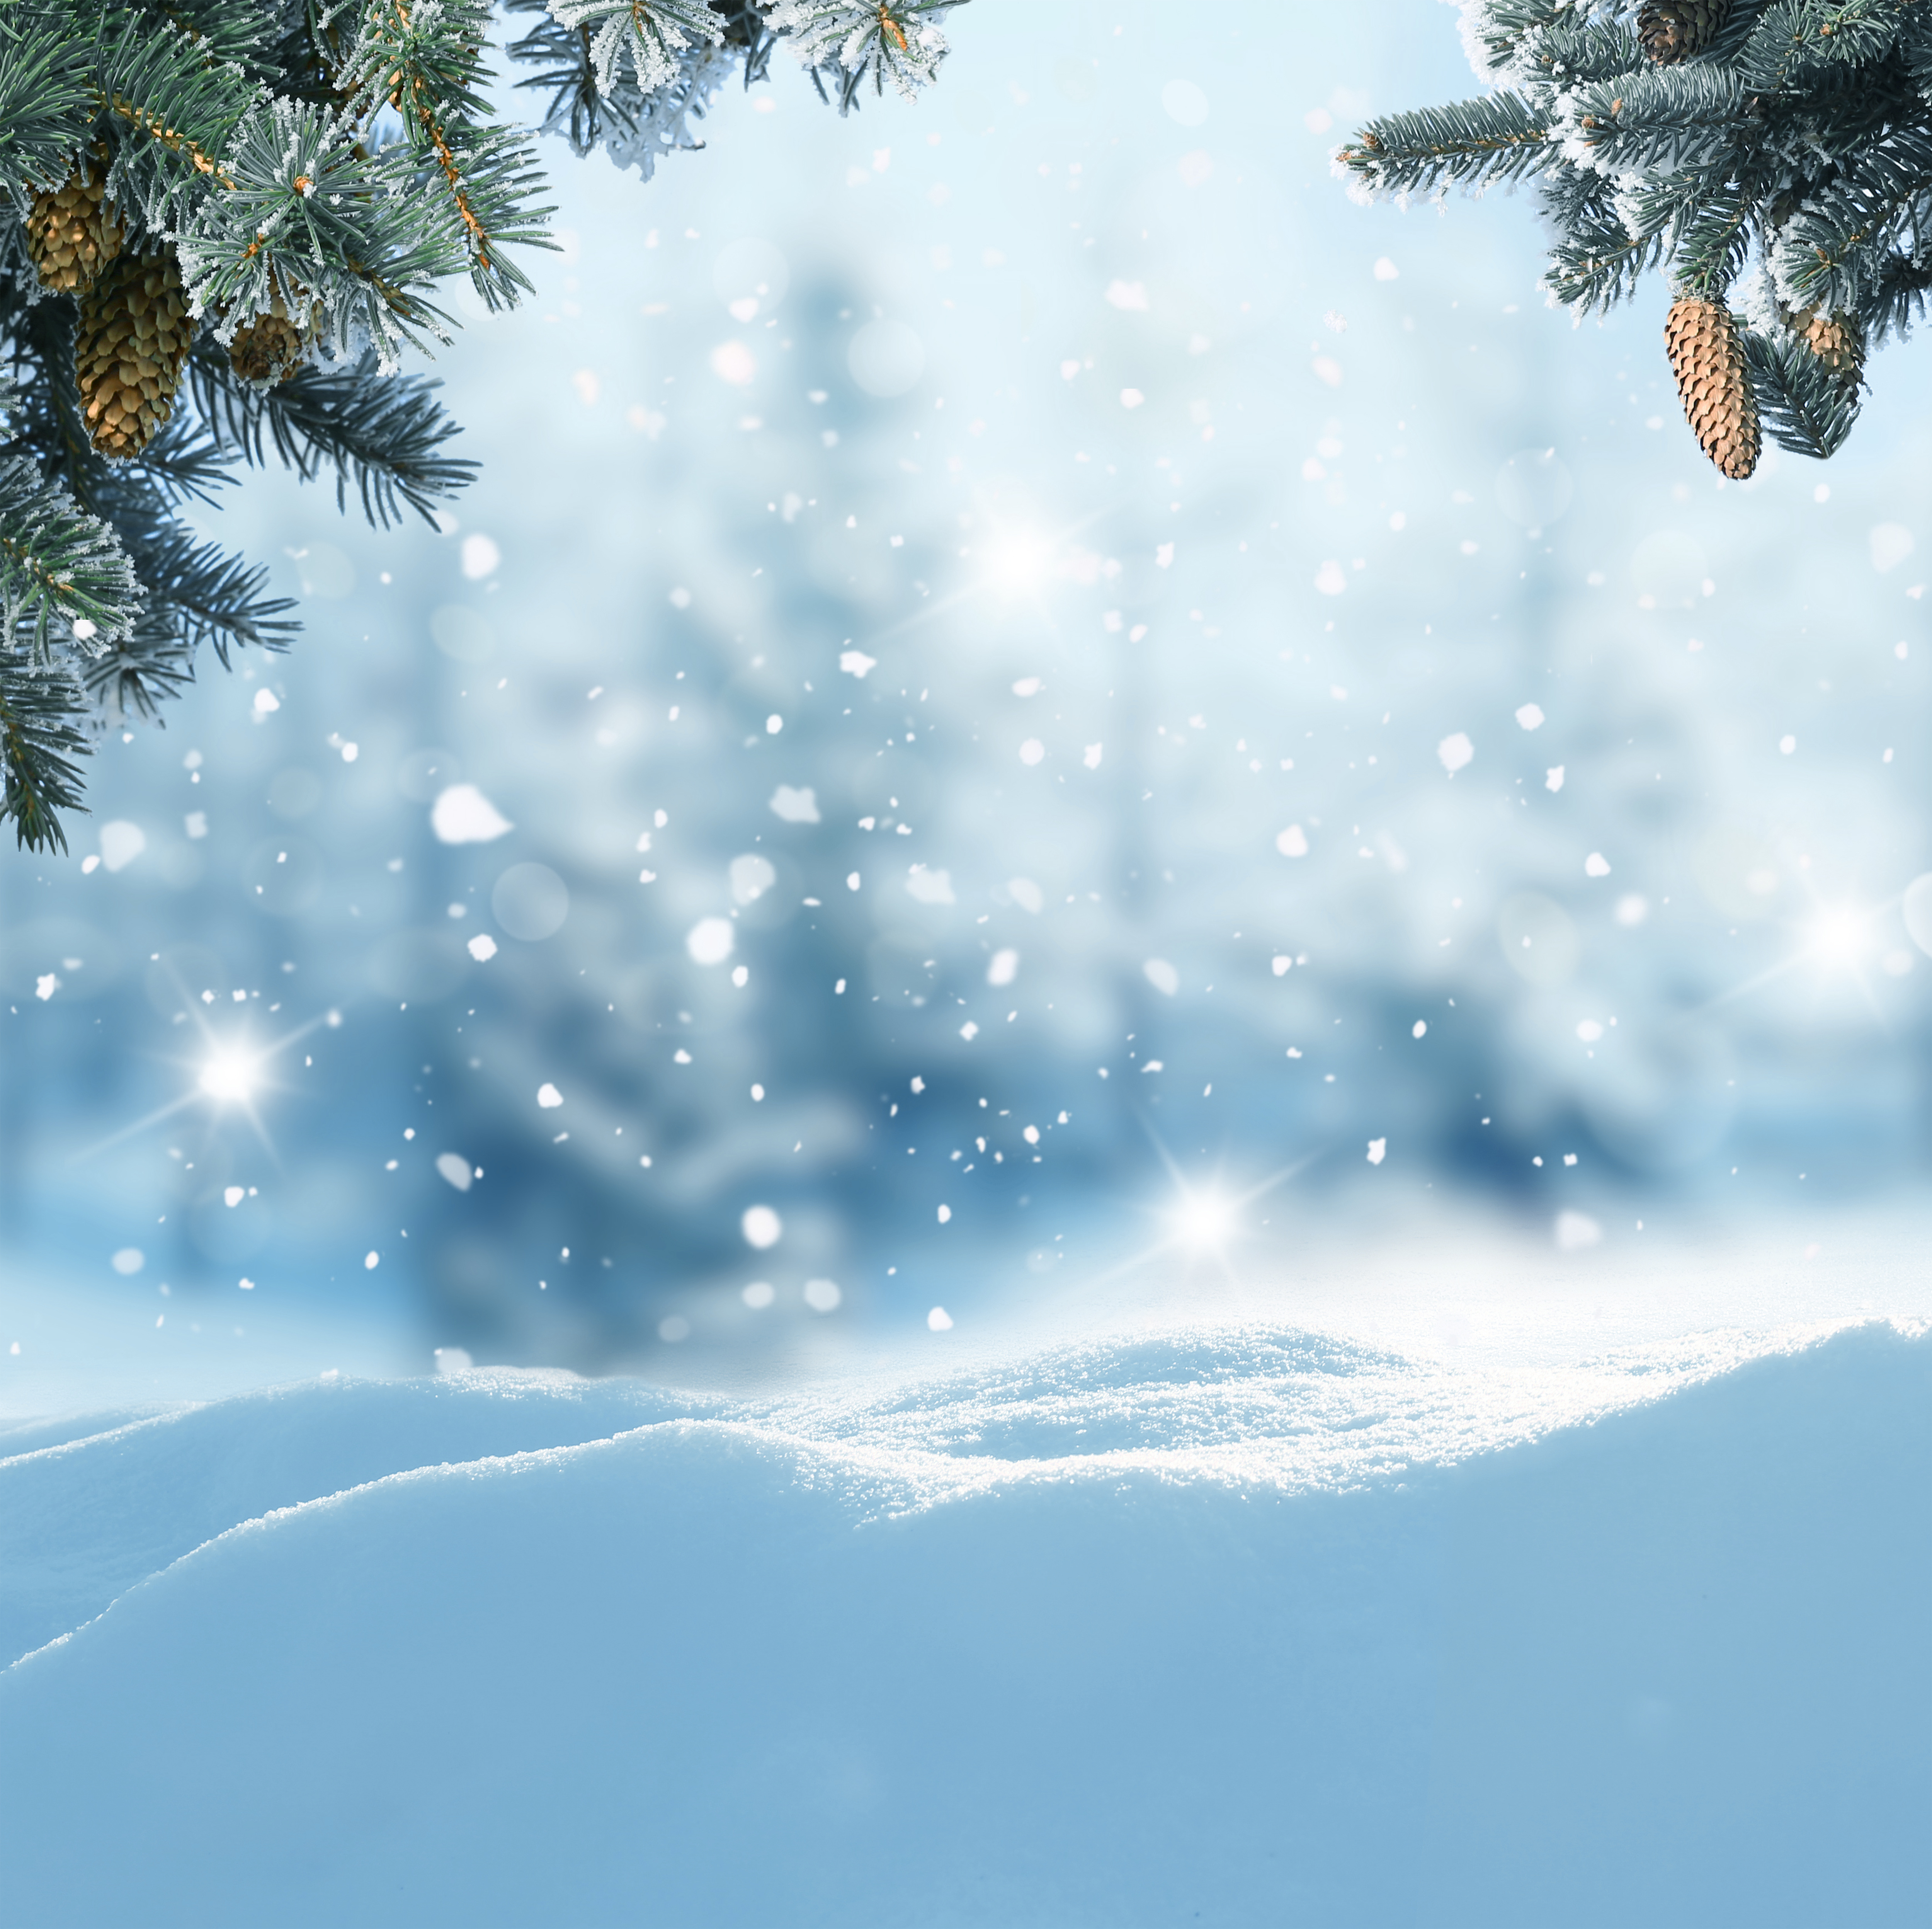 Winter Snowy Background With Pine Branches Gallery Yopriceville High Quality Images And Transparent Png Free Clipart